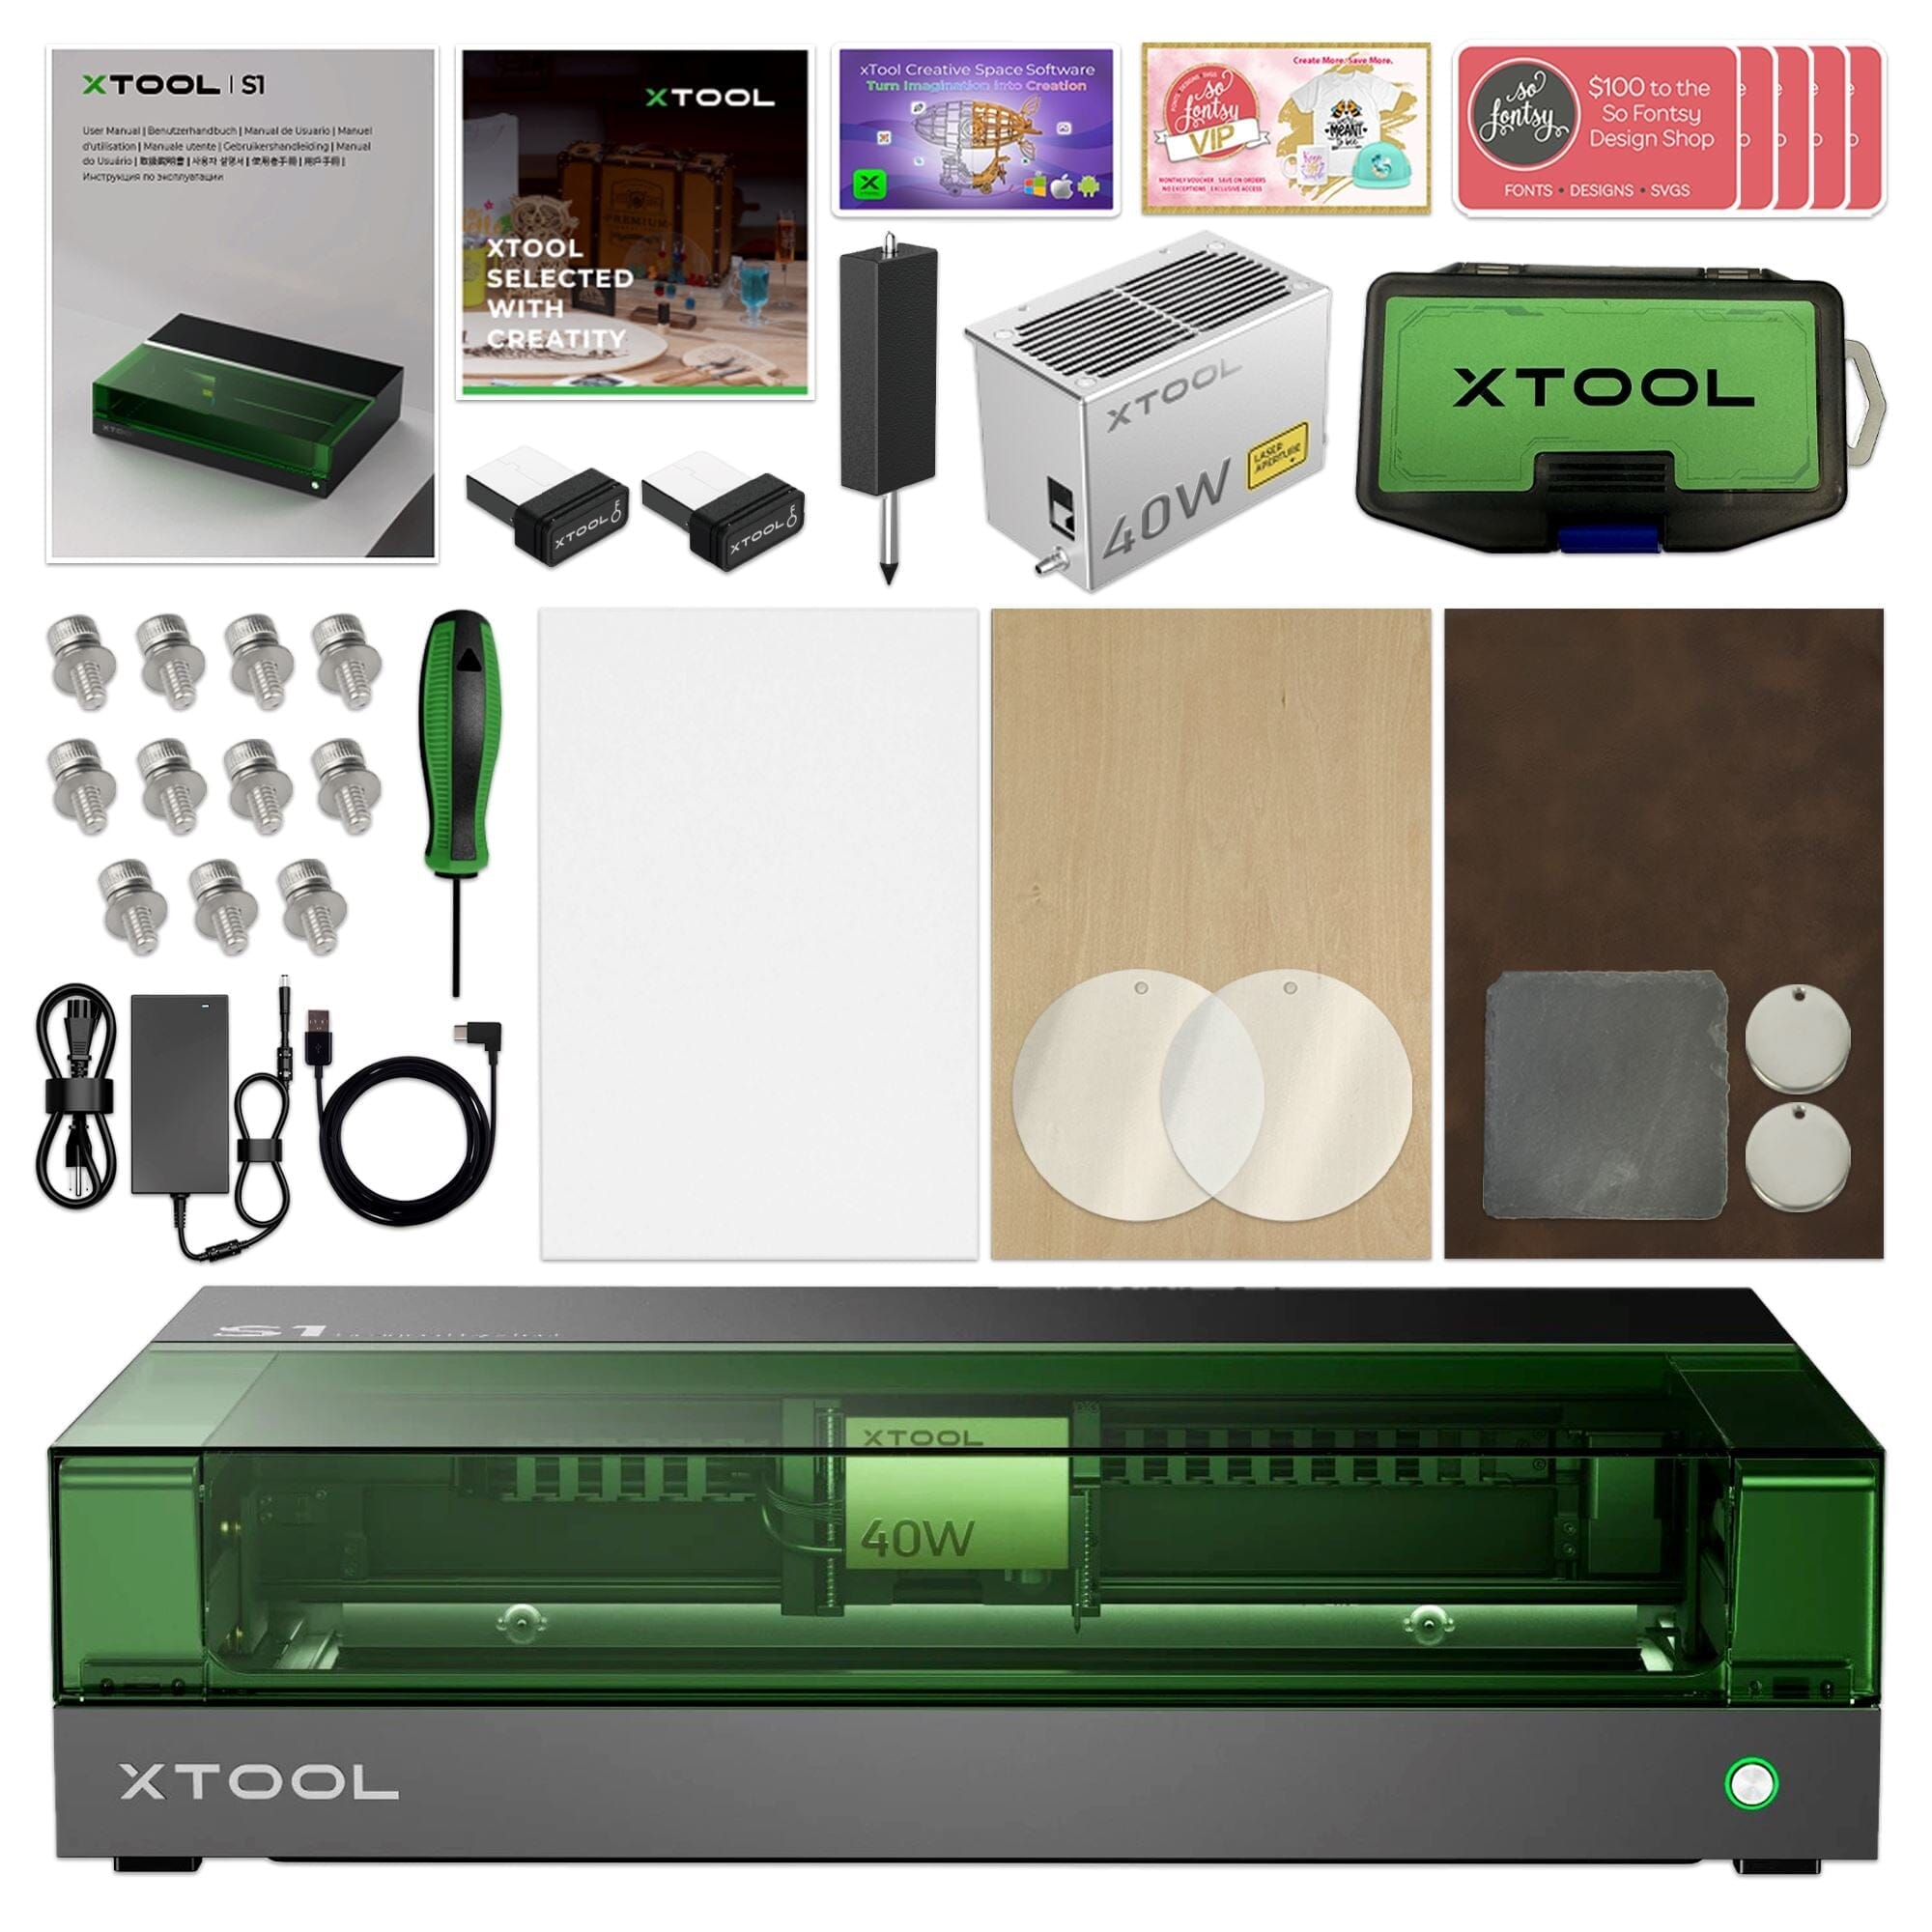 xTool S1 Enclosed Diode Laser Cutter, 40W